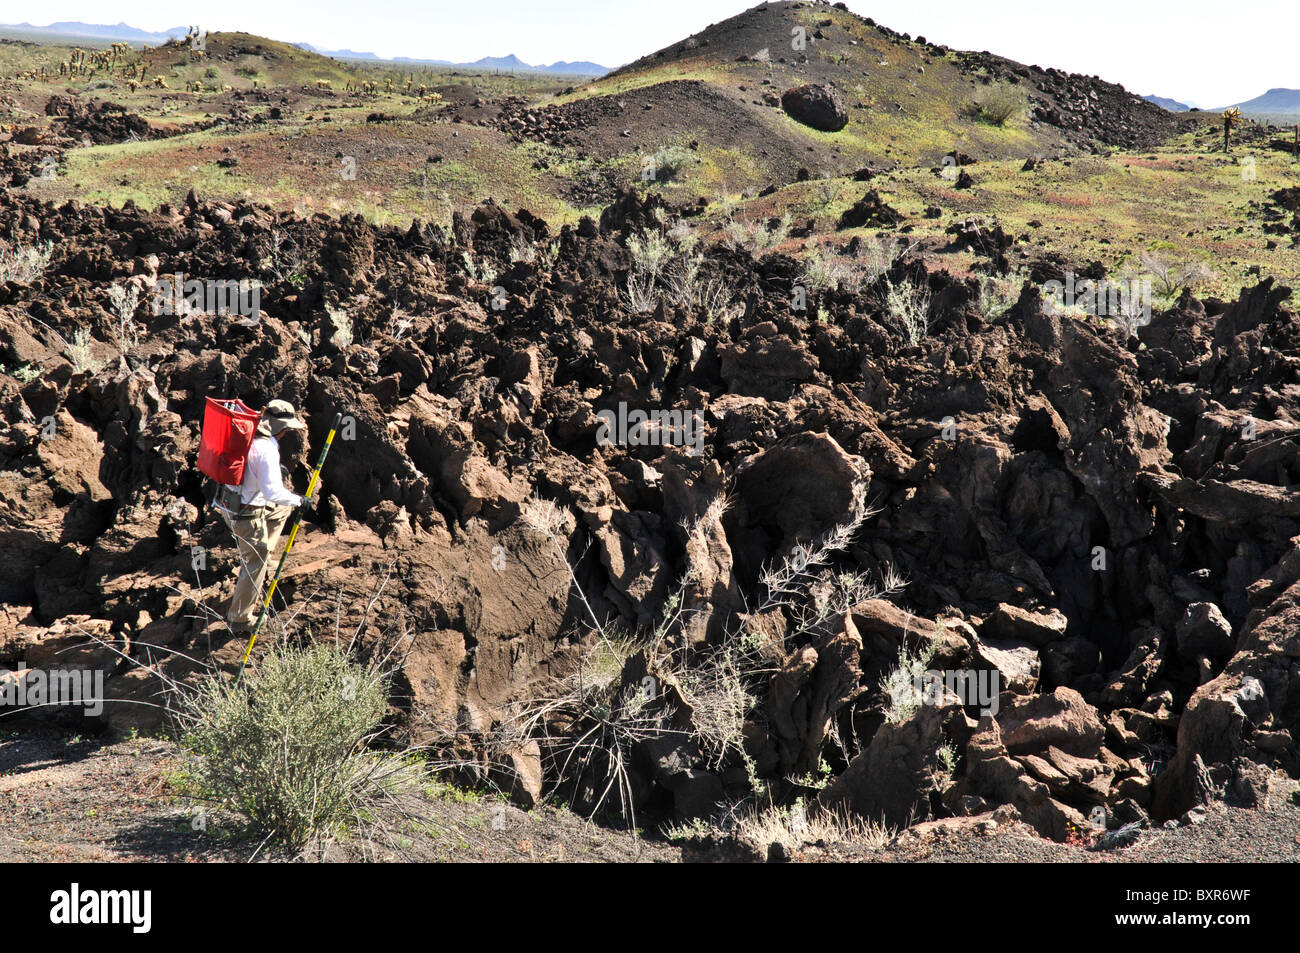 Geologist viewing extremely rugged lava flow on side of Tecolote cinder cone, El Pinacate Biosphere Reserve, Sonora, Mexico Stock Photo